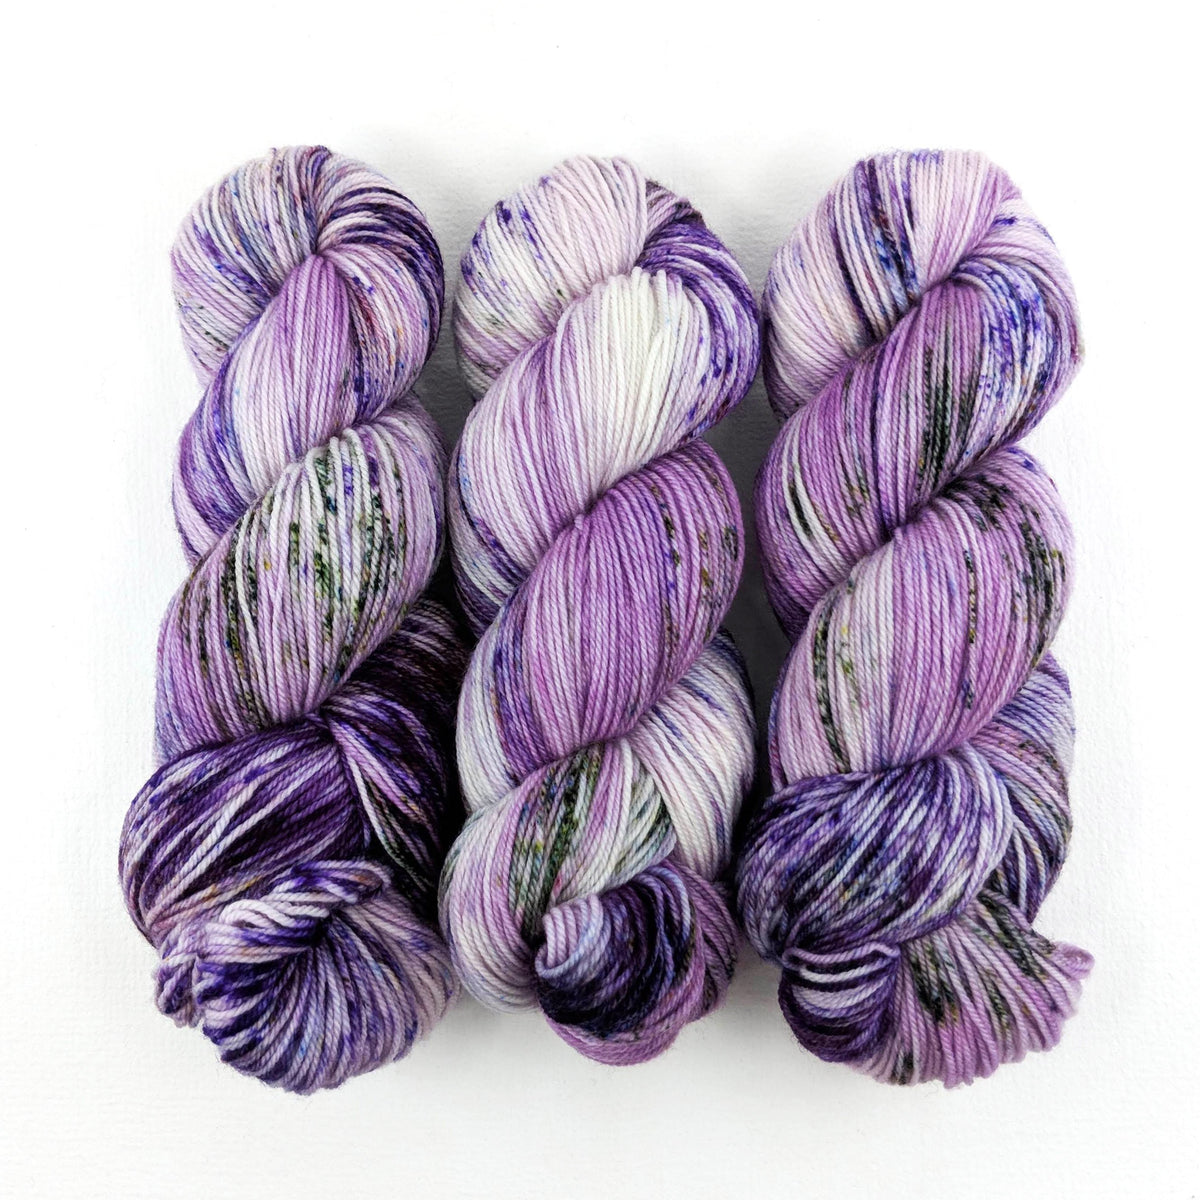 Wild Orchid - Merino DK / Light Worsted - Dyed Stock